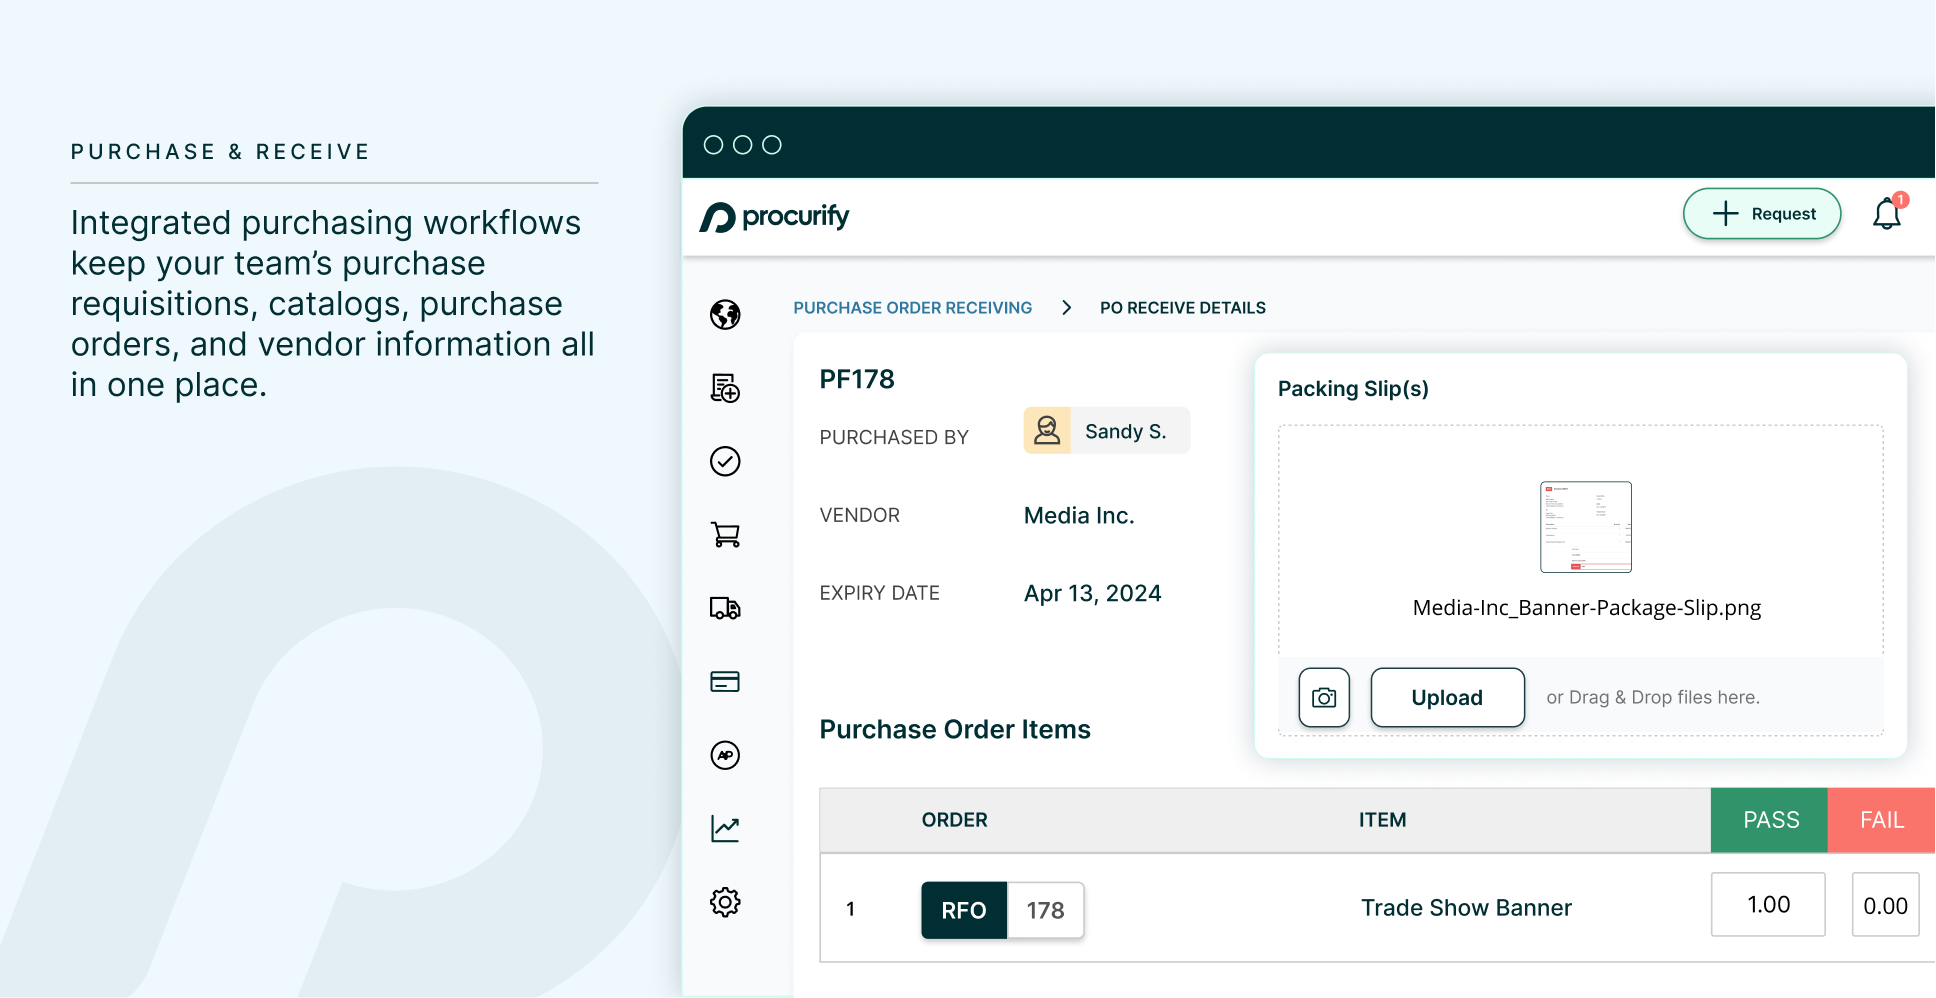 Procurify Software - Consolidate purchase requisitions, catalogs, purchase orders, and vendor information, so you can stop searching for documents and start focusing on what matters.